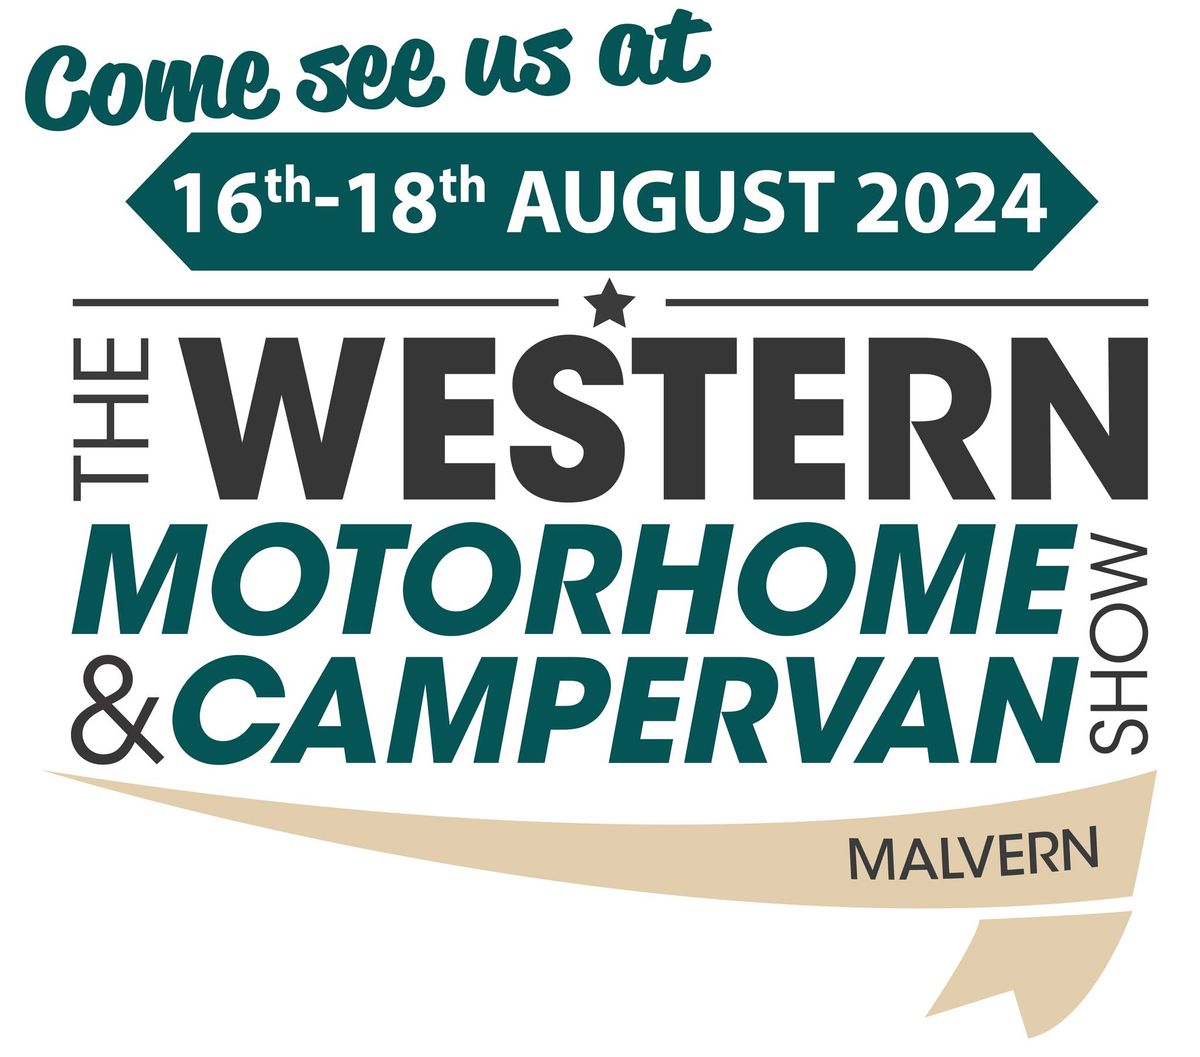 The Western Motorhome and Campervan Show, Malvern.